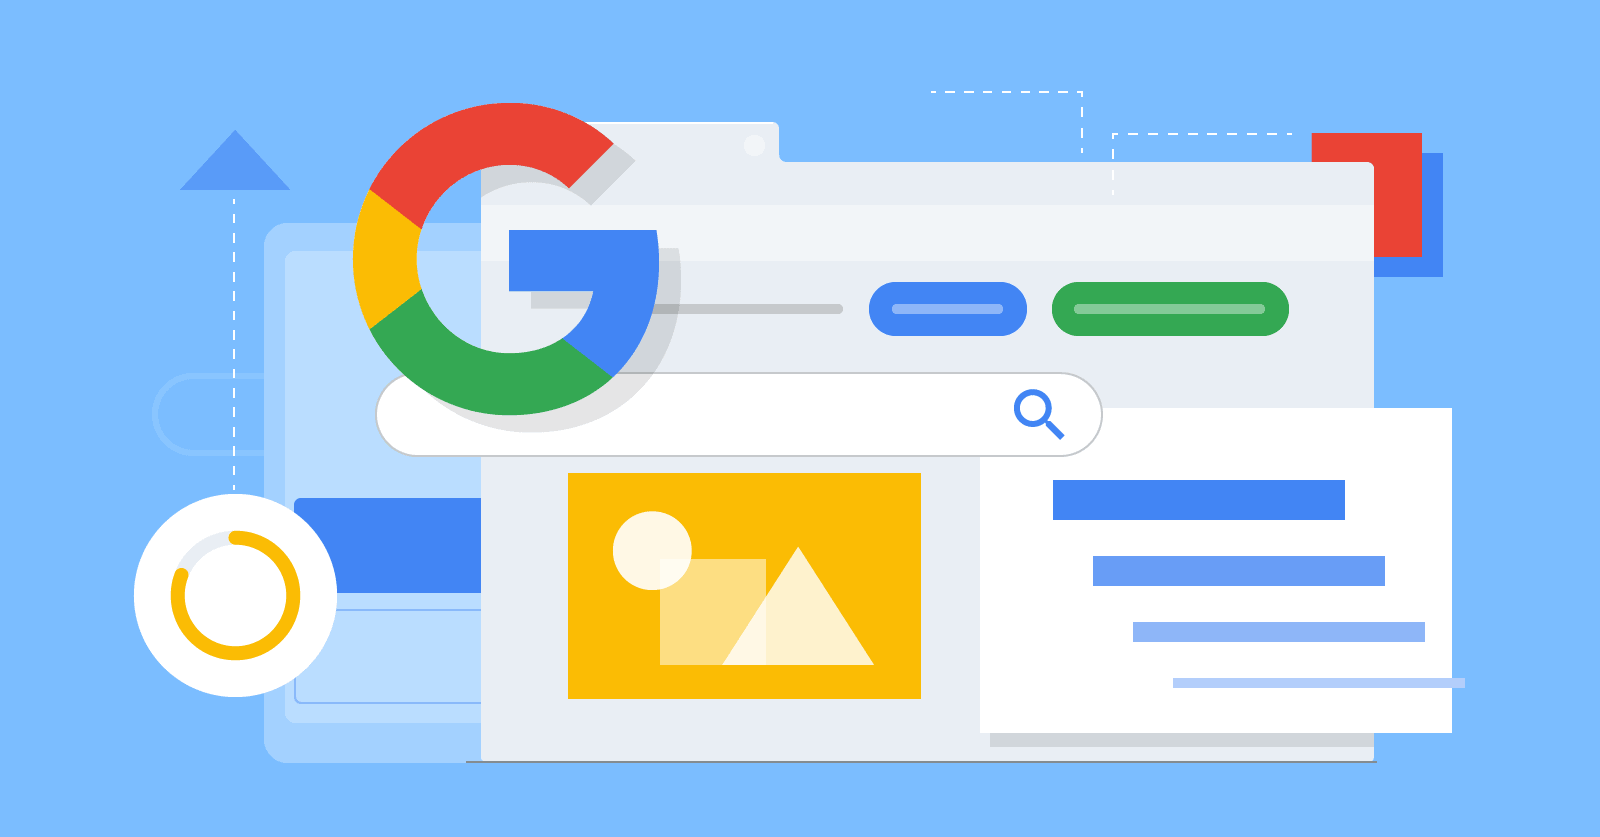 Google: Crawl Rate changes takes a day to reflect. Google Officially confirmed